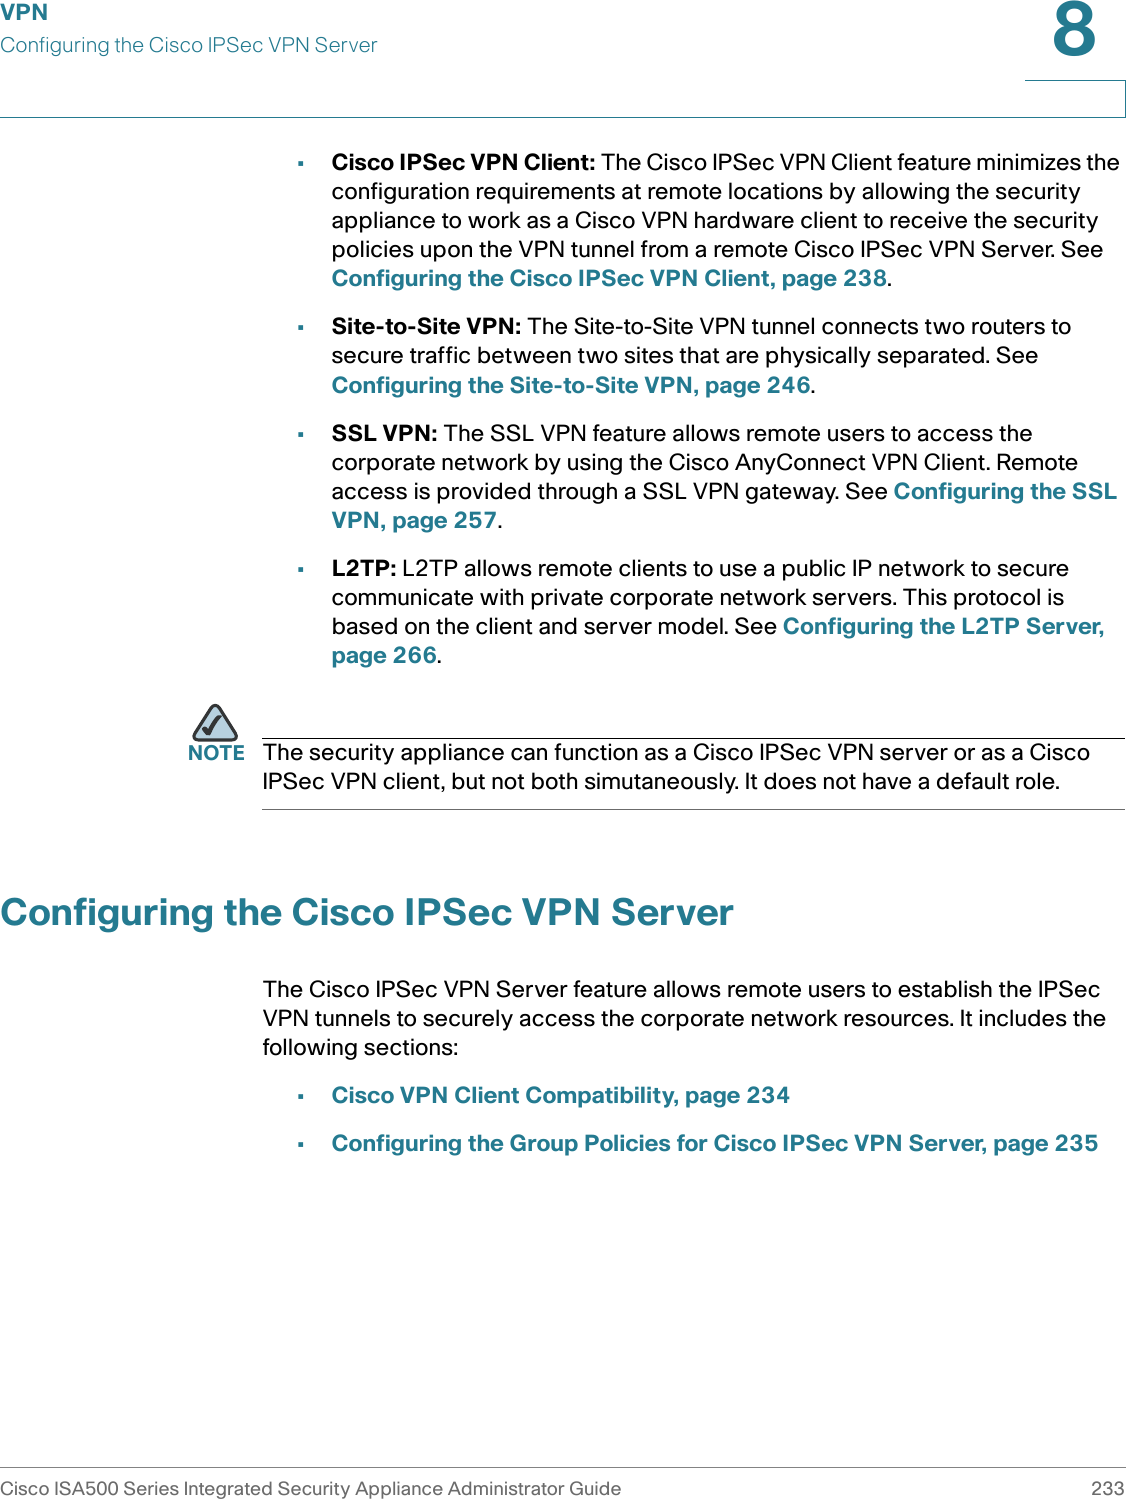 VPNConfiguring the Cisco IPSec VPN ServerCisco ISA500 Series Integrated Security Appliance Administrator Guide 2338 •Cisco IPSec VPN Client: The Cisco IPSec VPN Client feature minimizes the configuration requirements at remote locations by allowing the security appliance to work as a Cisco VPN hardware client to receive the security policies upon the VPN tunnel from a remote Cisco IPSec VPN Server. See Configuring the Cisco IPSec VPN Client, page 238.•Site-to-Site VPN: The Site-to-Site VPN tunnel connects two routers to secure traffic between two sites that are physically separated. See Configuring the Site-to-Site VPN, page 246.•SSL VPN: The SSL VPN feature allows remote users to access the corporate network by using the Cisco AnyConnect VPN Client. Remote access is provided through a SSL VPN gateway. See Configuring the SSL VPN, page 257.•L2TP: L2TP allows remote clients to use a public IP network to secure communicate with private corporate network servers. This protocol is based on the client and server model. See Configuring the L2TP Server, page 266.NOTE The security appliance can function as a Cisco IPSec VPN server or as a Cisco IPSec VPN client, but not both simutaneously. It does not have a default role. Configuring the Cisco IPSec VPN ServerThe Cisco IPSec VPN Server feature allows remote users to establish the IPSec VPN tunnels to securely access the corporate network resources. It includes the following sections: •Cisco VPN Client Compatibility, page 234•Configuring the Group Policies for Cisco IPSec VPN Server, page 235